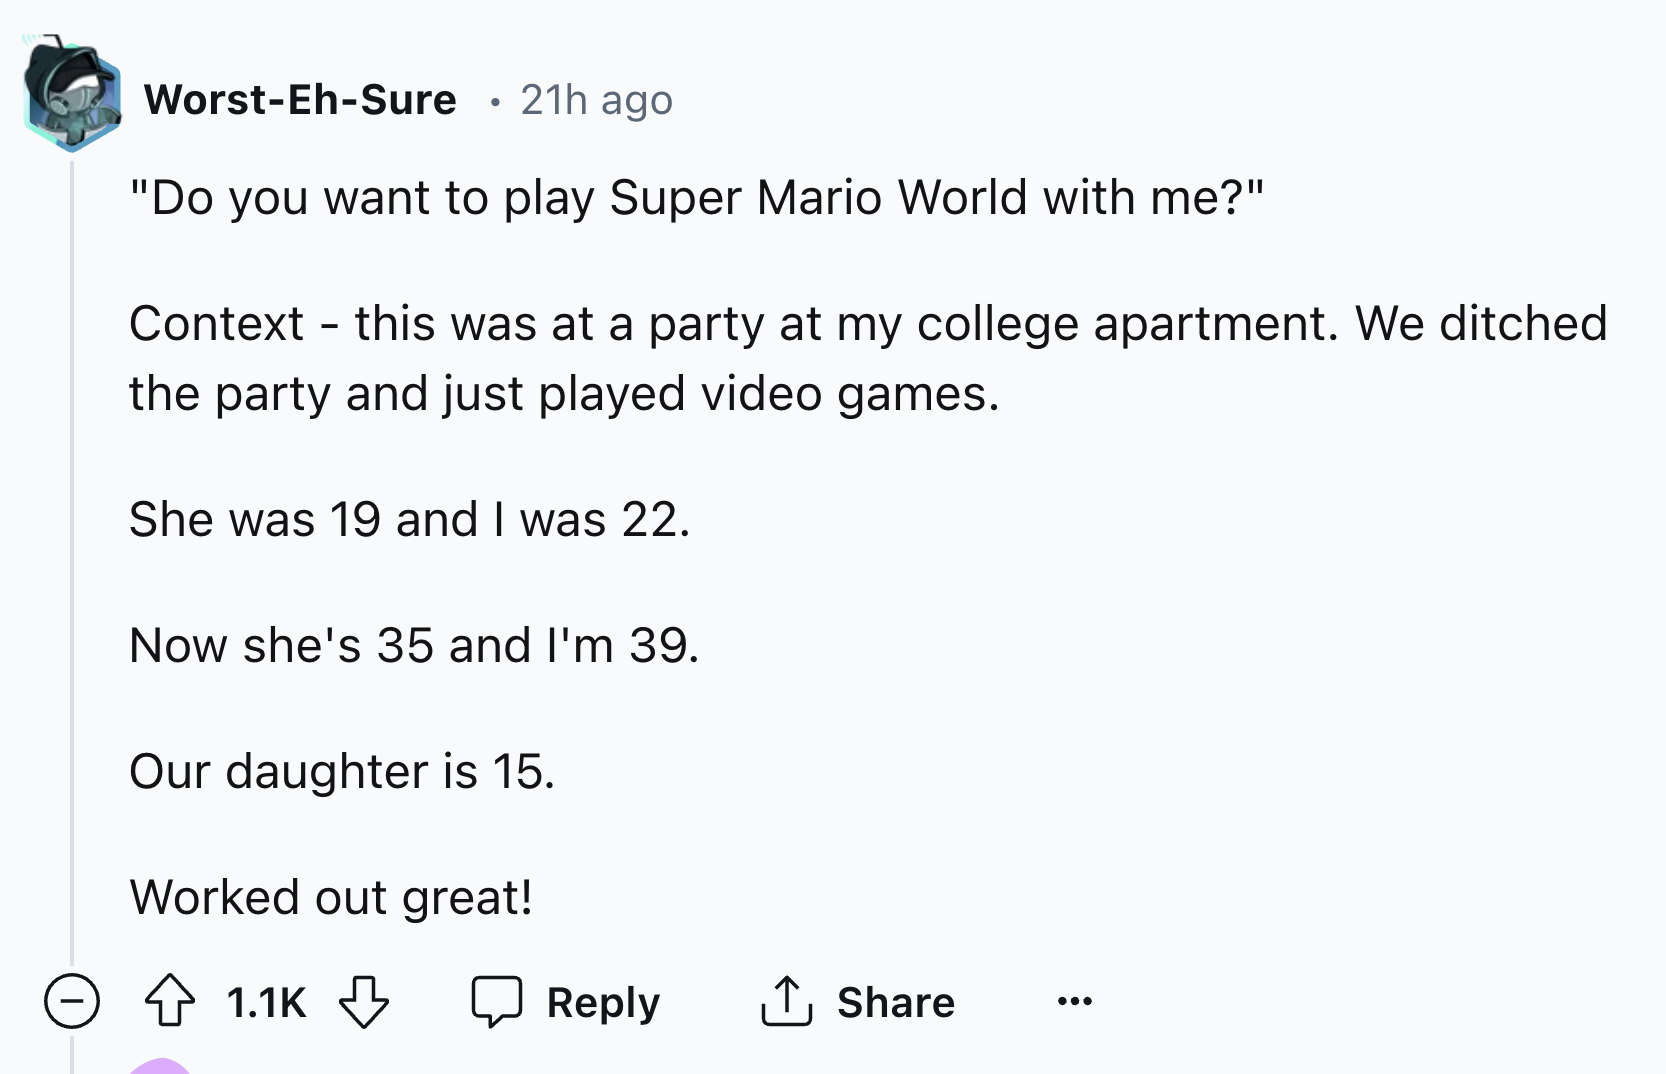 document - WorstEhSure 21h ago "Do you want to play Super Mario World with me?" Context this was at a party at my college apartment. We ditched the party and just played video games. She was 19 and I was 22. Now she's 35 and I'm 39. Our daughter is 15. Wo